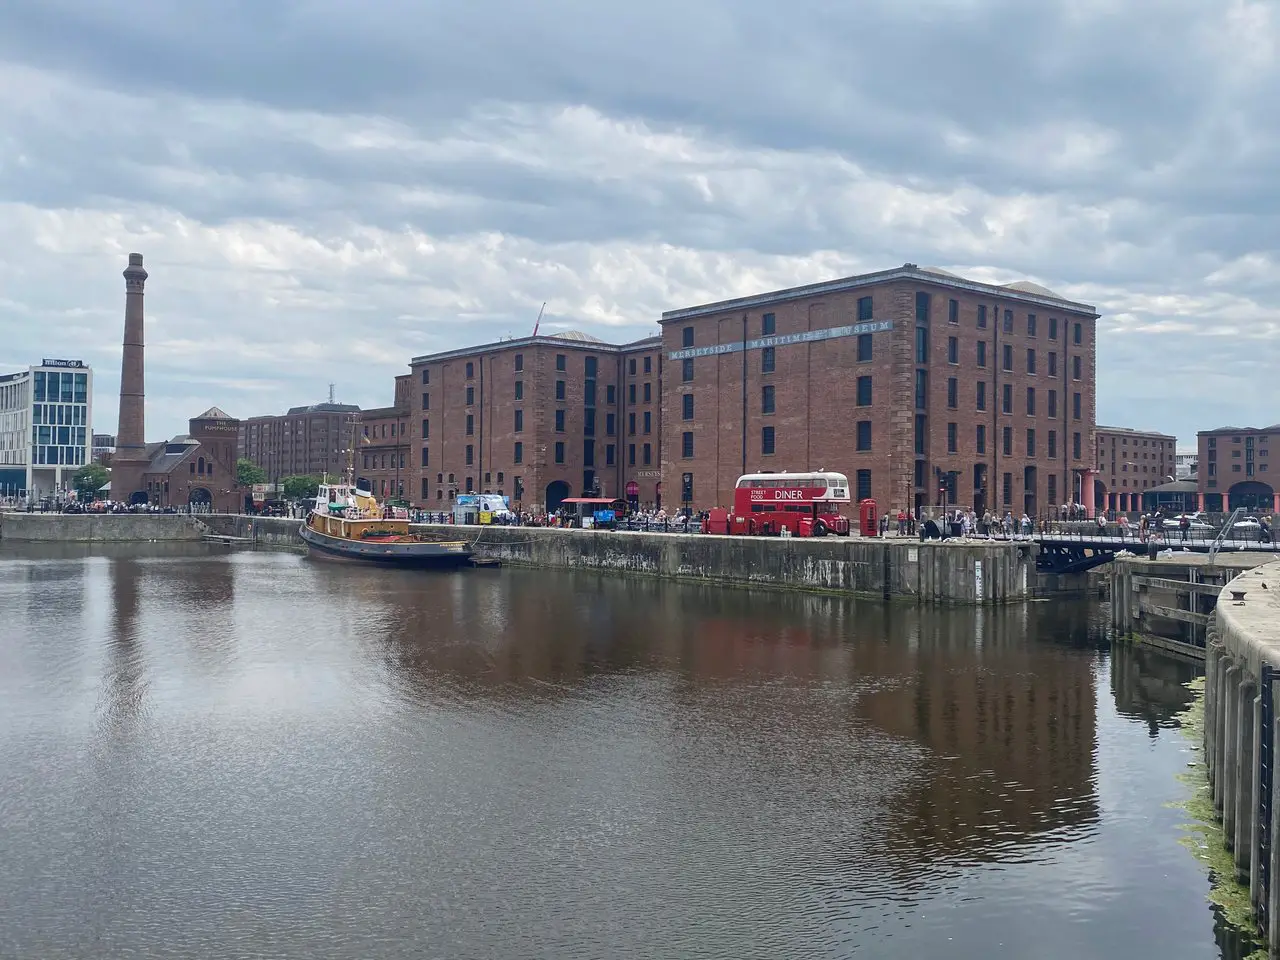 The red brick buildings of the Albert Dock, a former UNESCO site in Liverpool England, on a cloudy and gloomy day